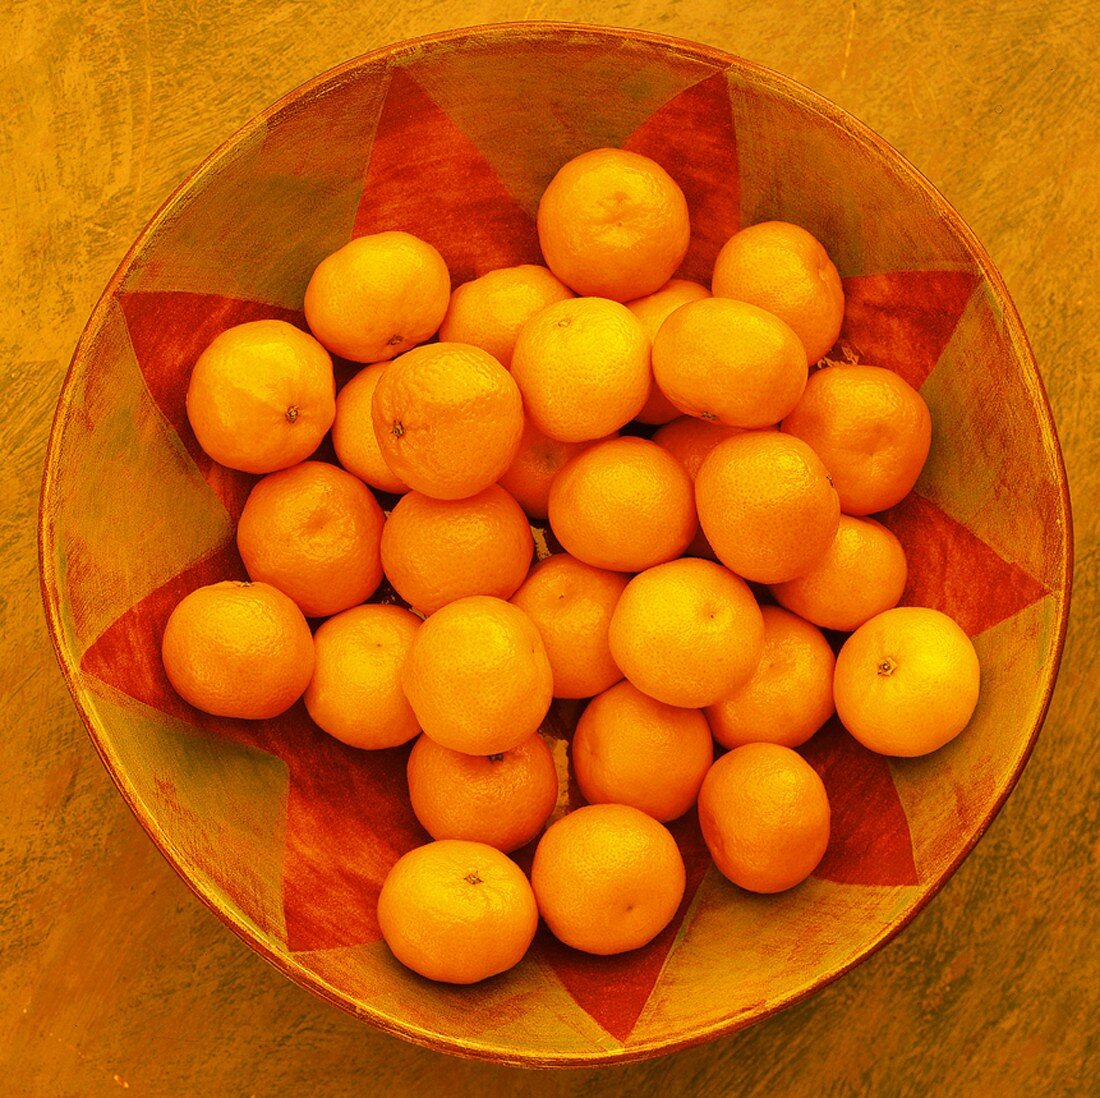 A Bowl full of Fresh Clementines